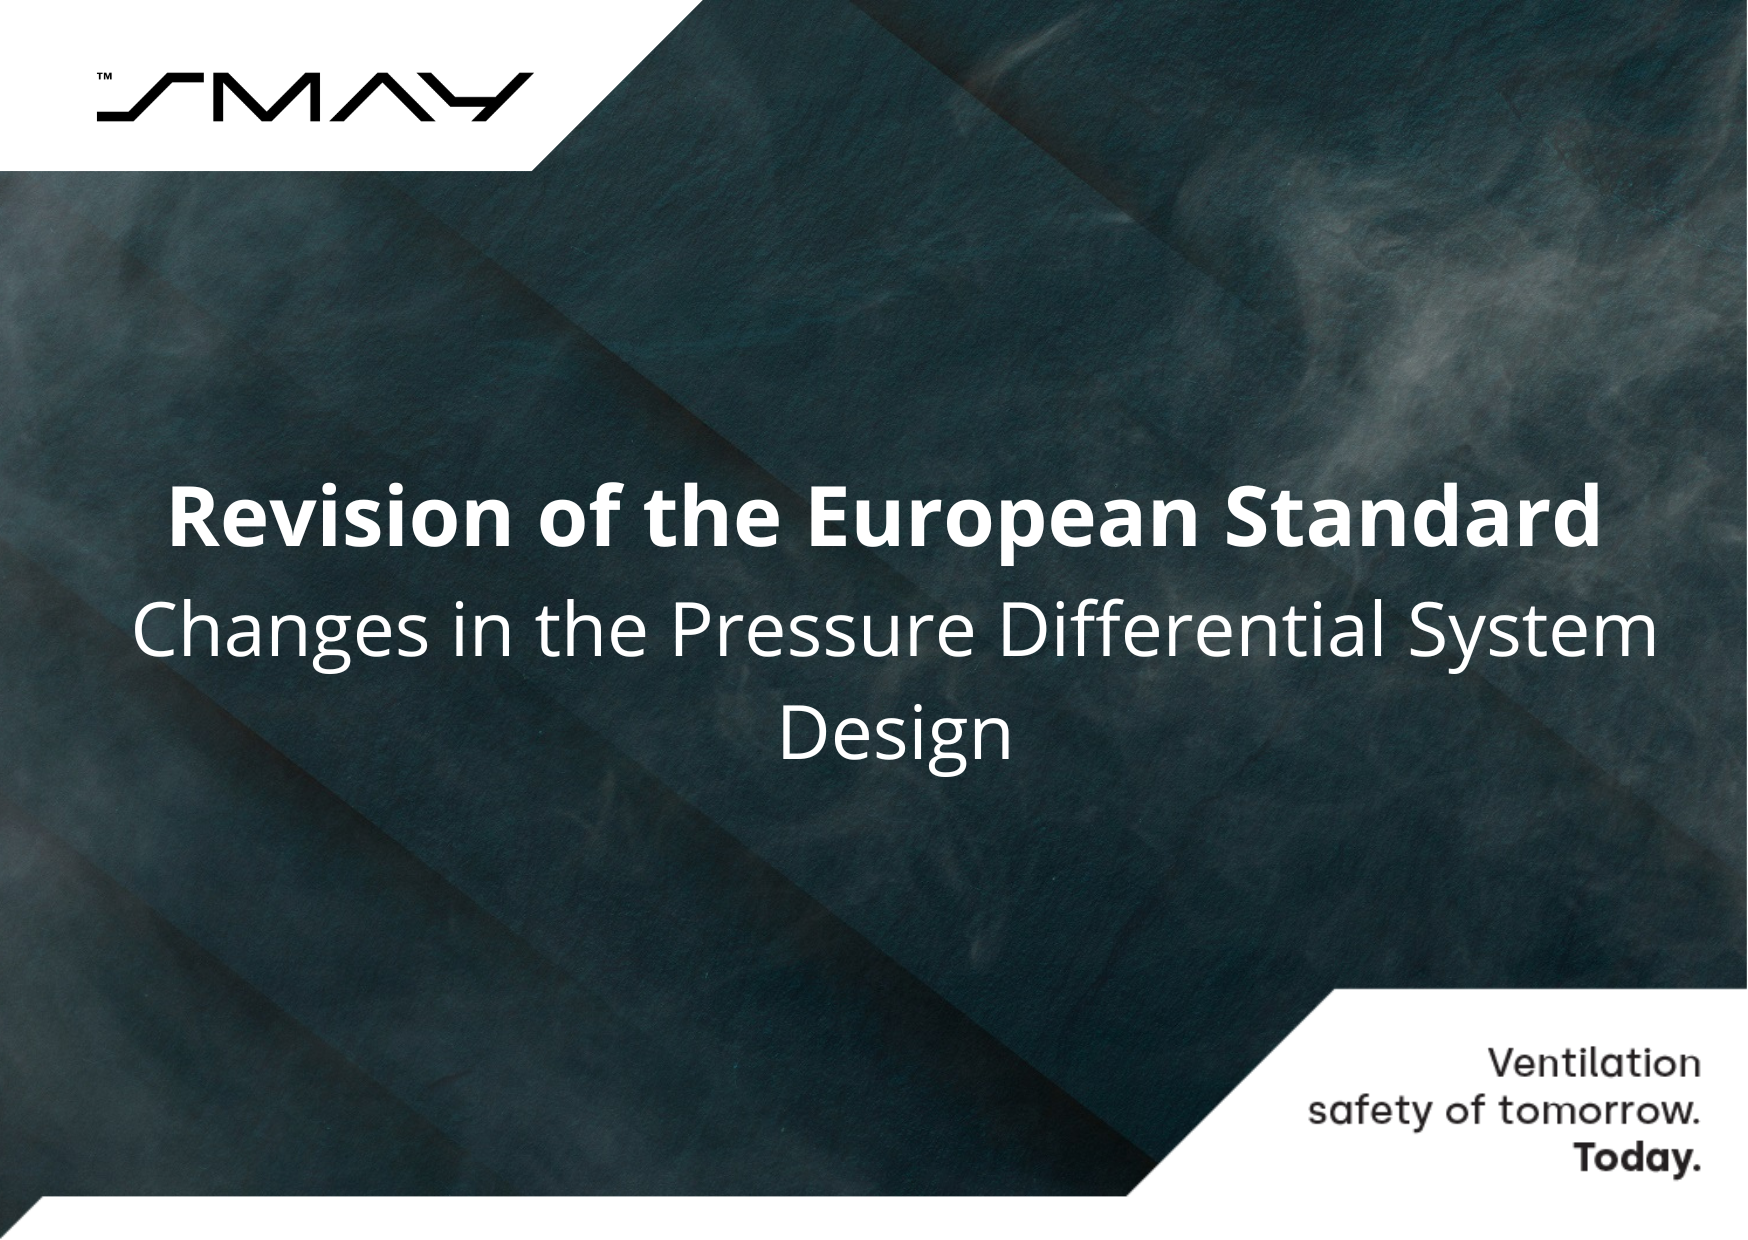 Revision of the European Standard Changes in the Pressure Differential System Design